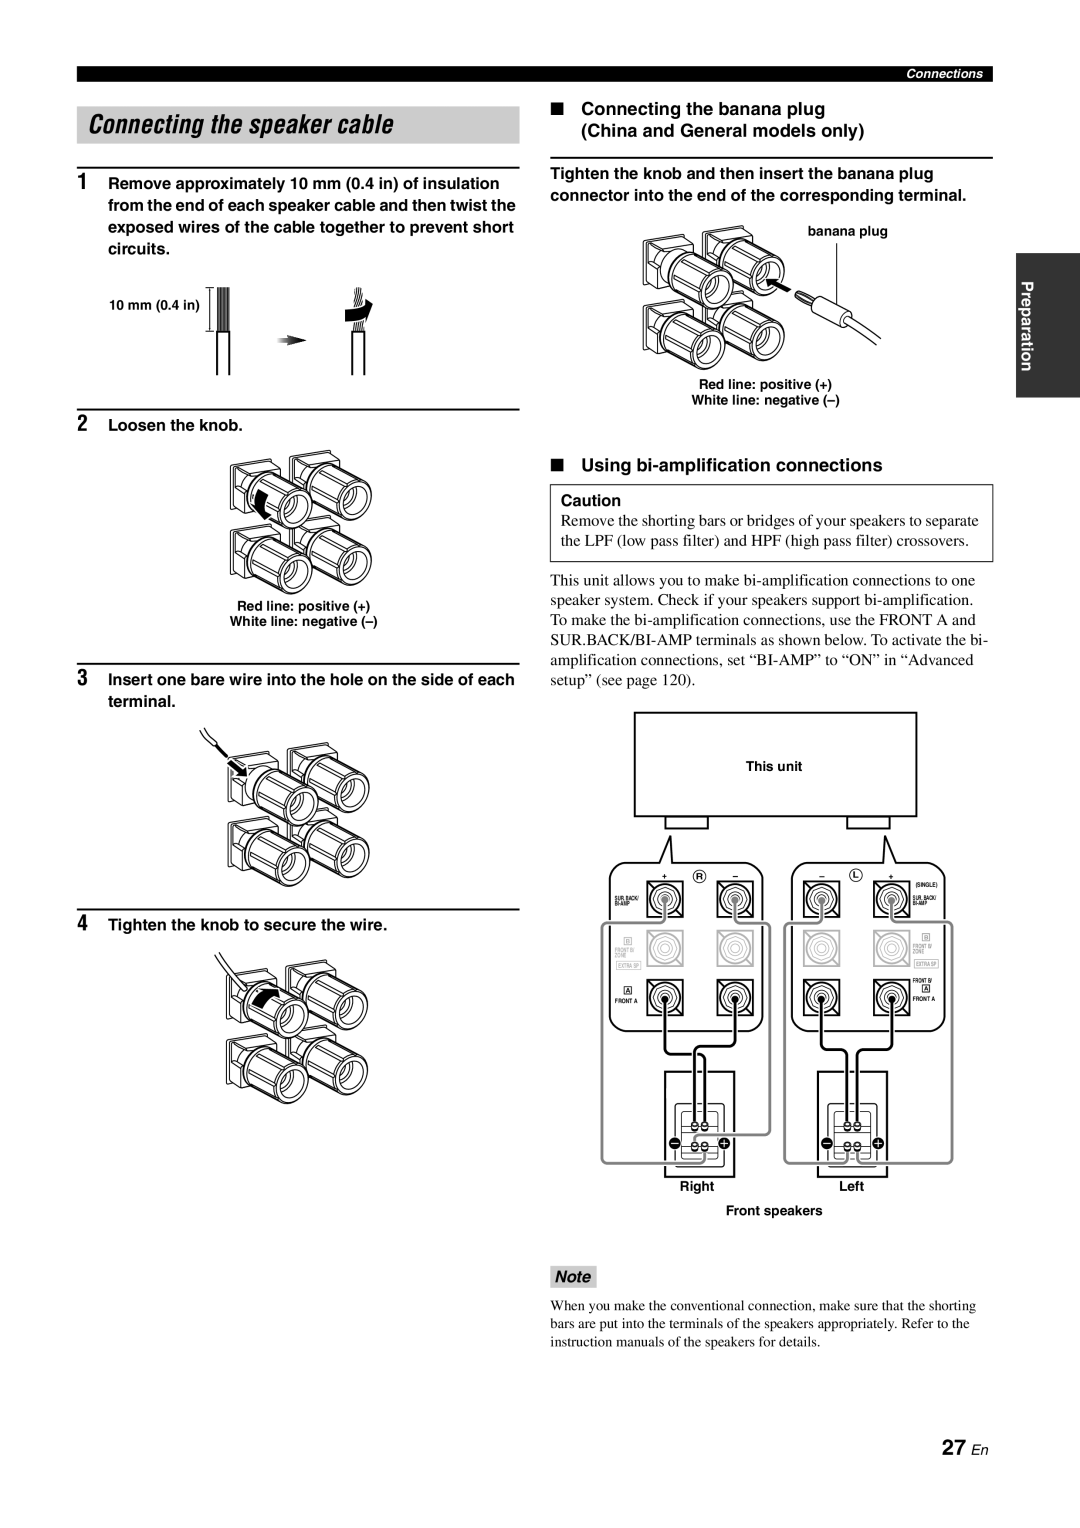 Yamaha DSP-Z11 owner manual Connecting the speaker cable, 27 En, Using bi-amplificationconnections, Preparation 